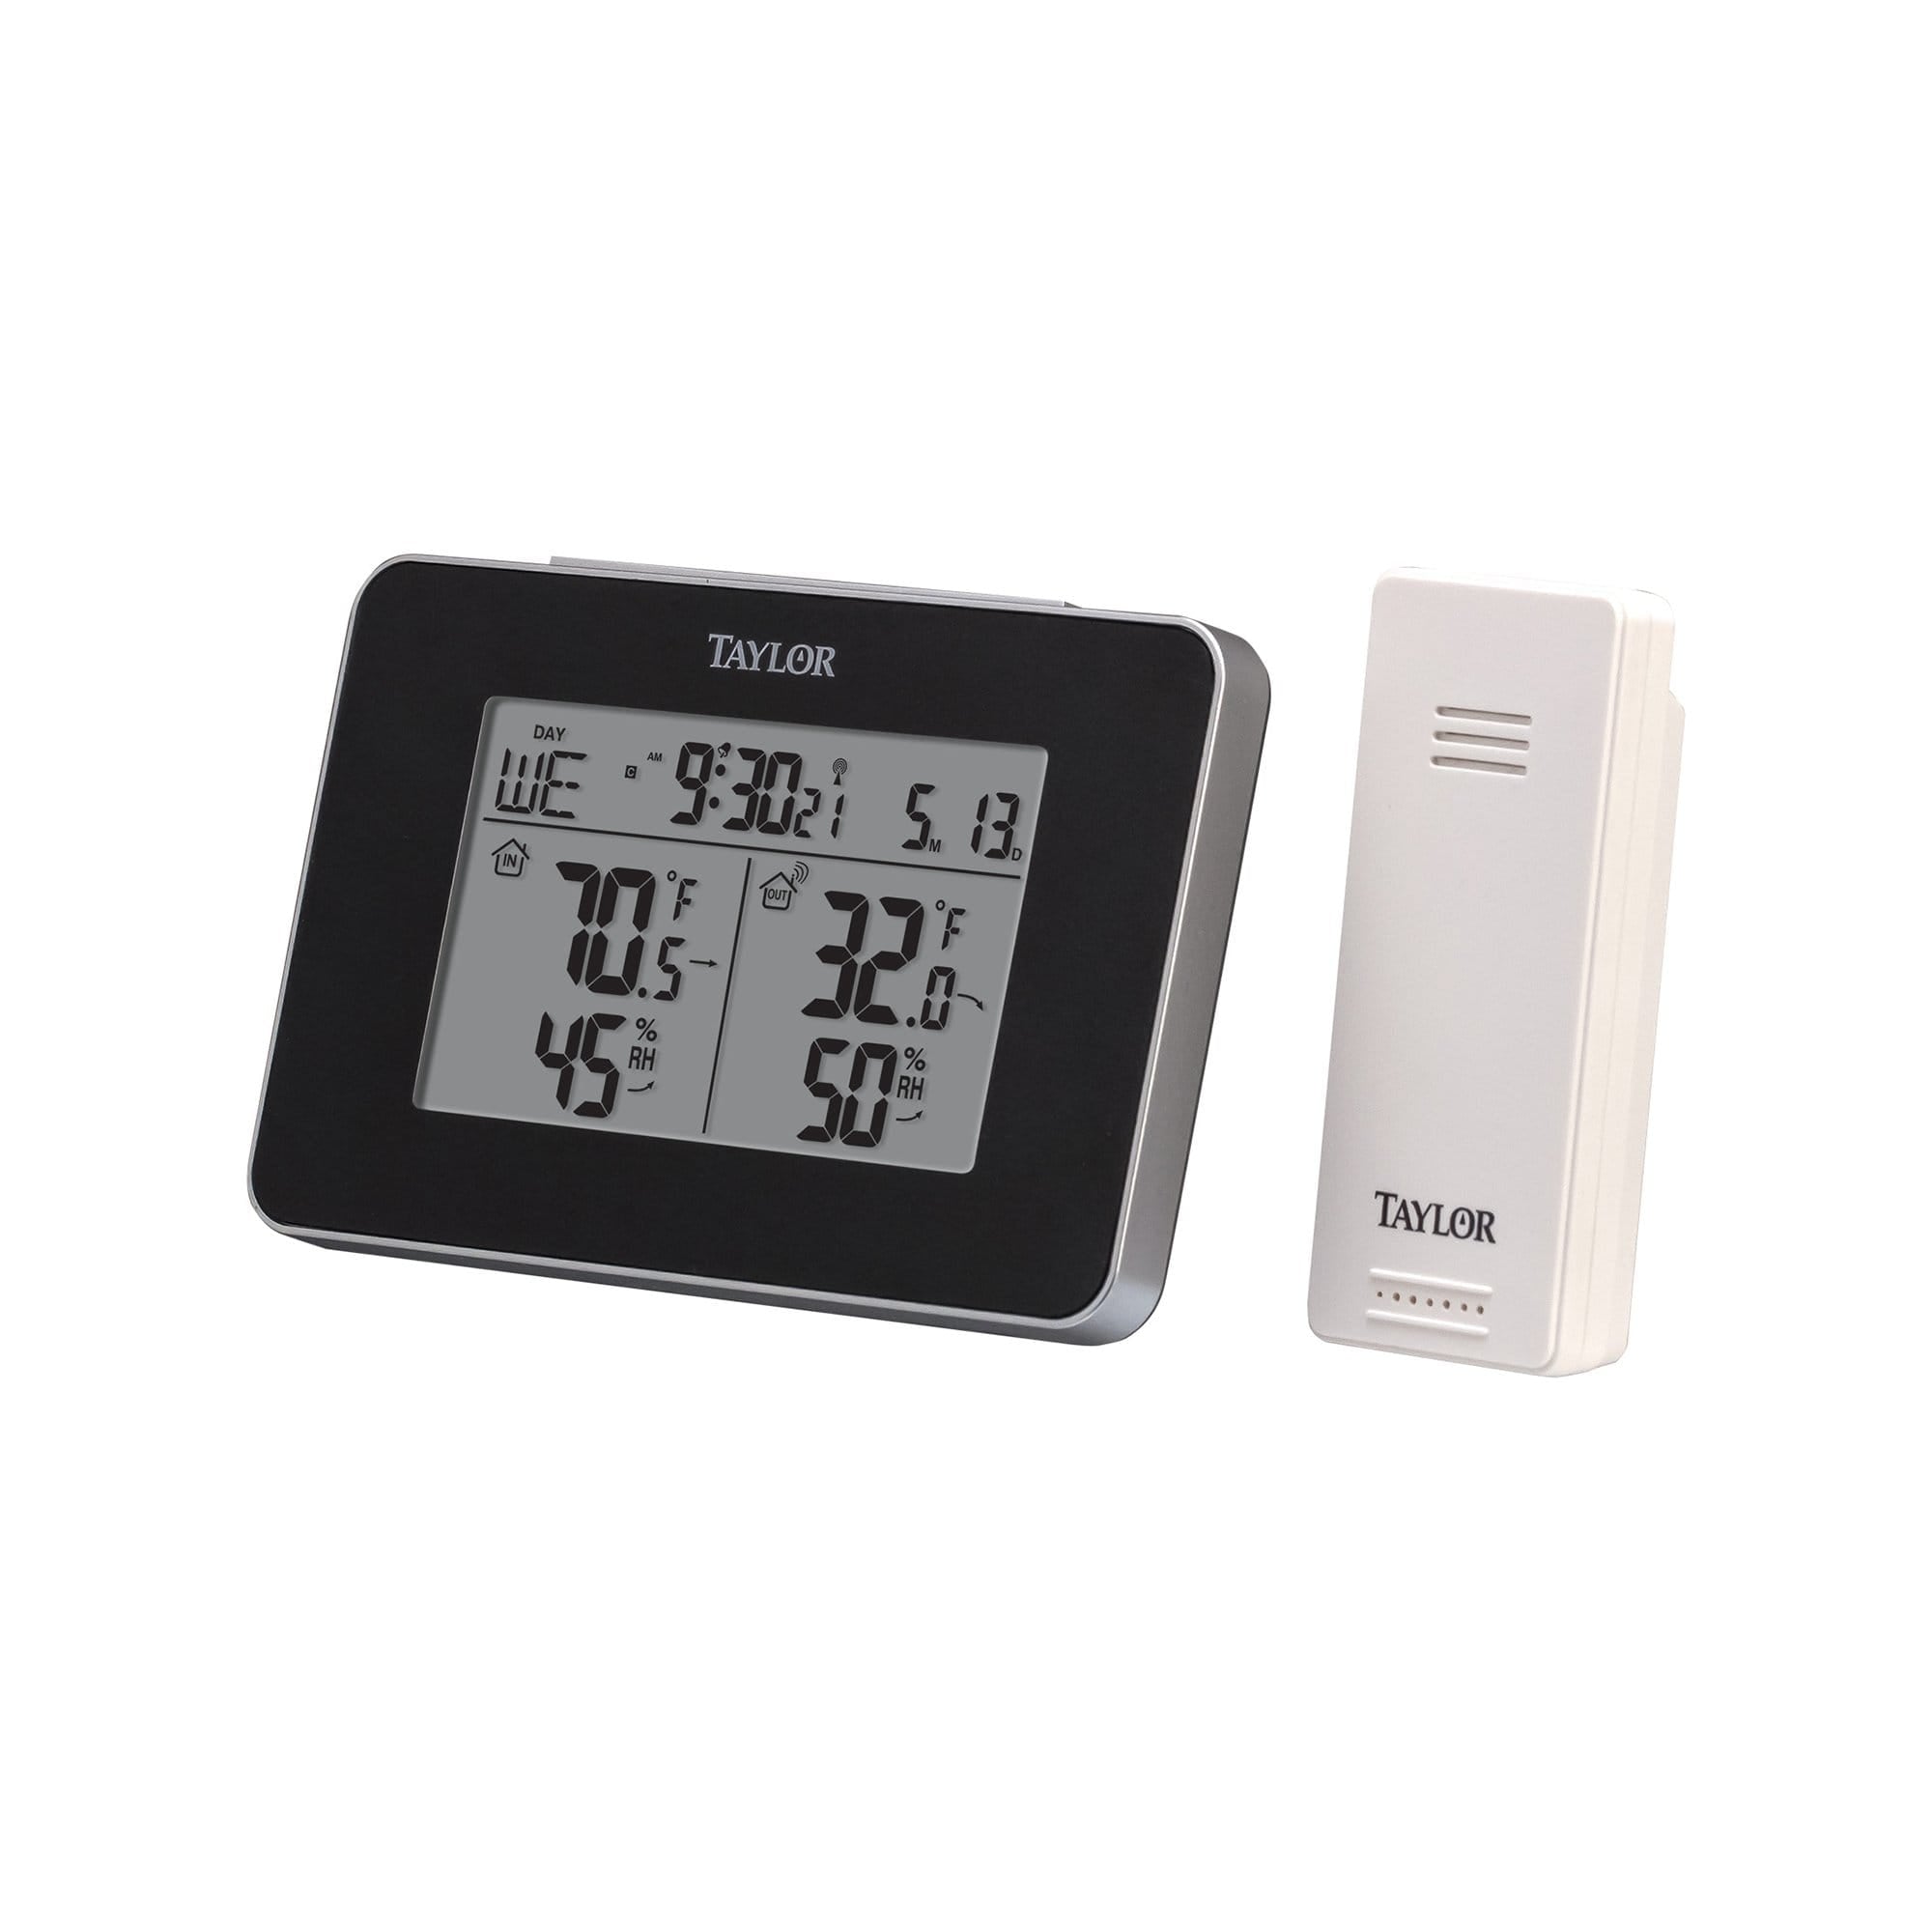 Weather station electronic thermometer, hygrometer with sensor